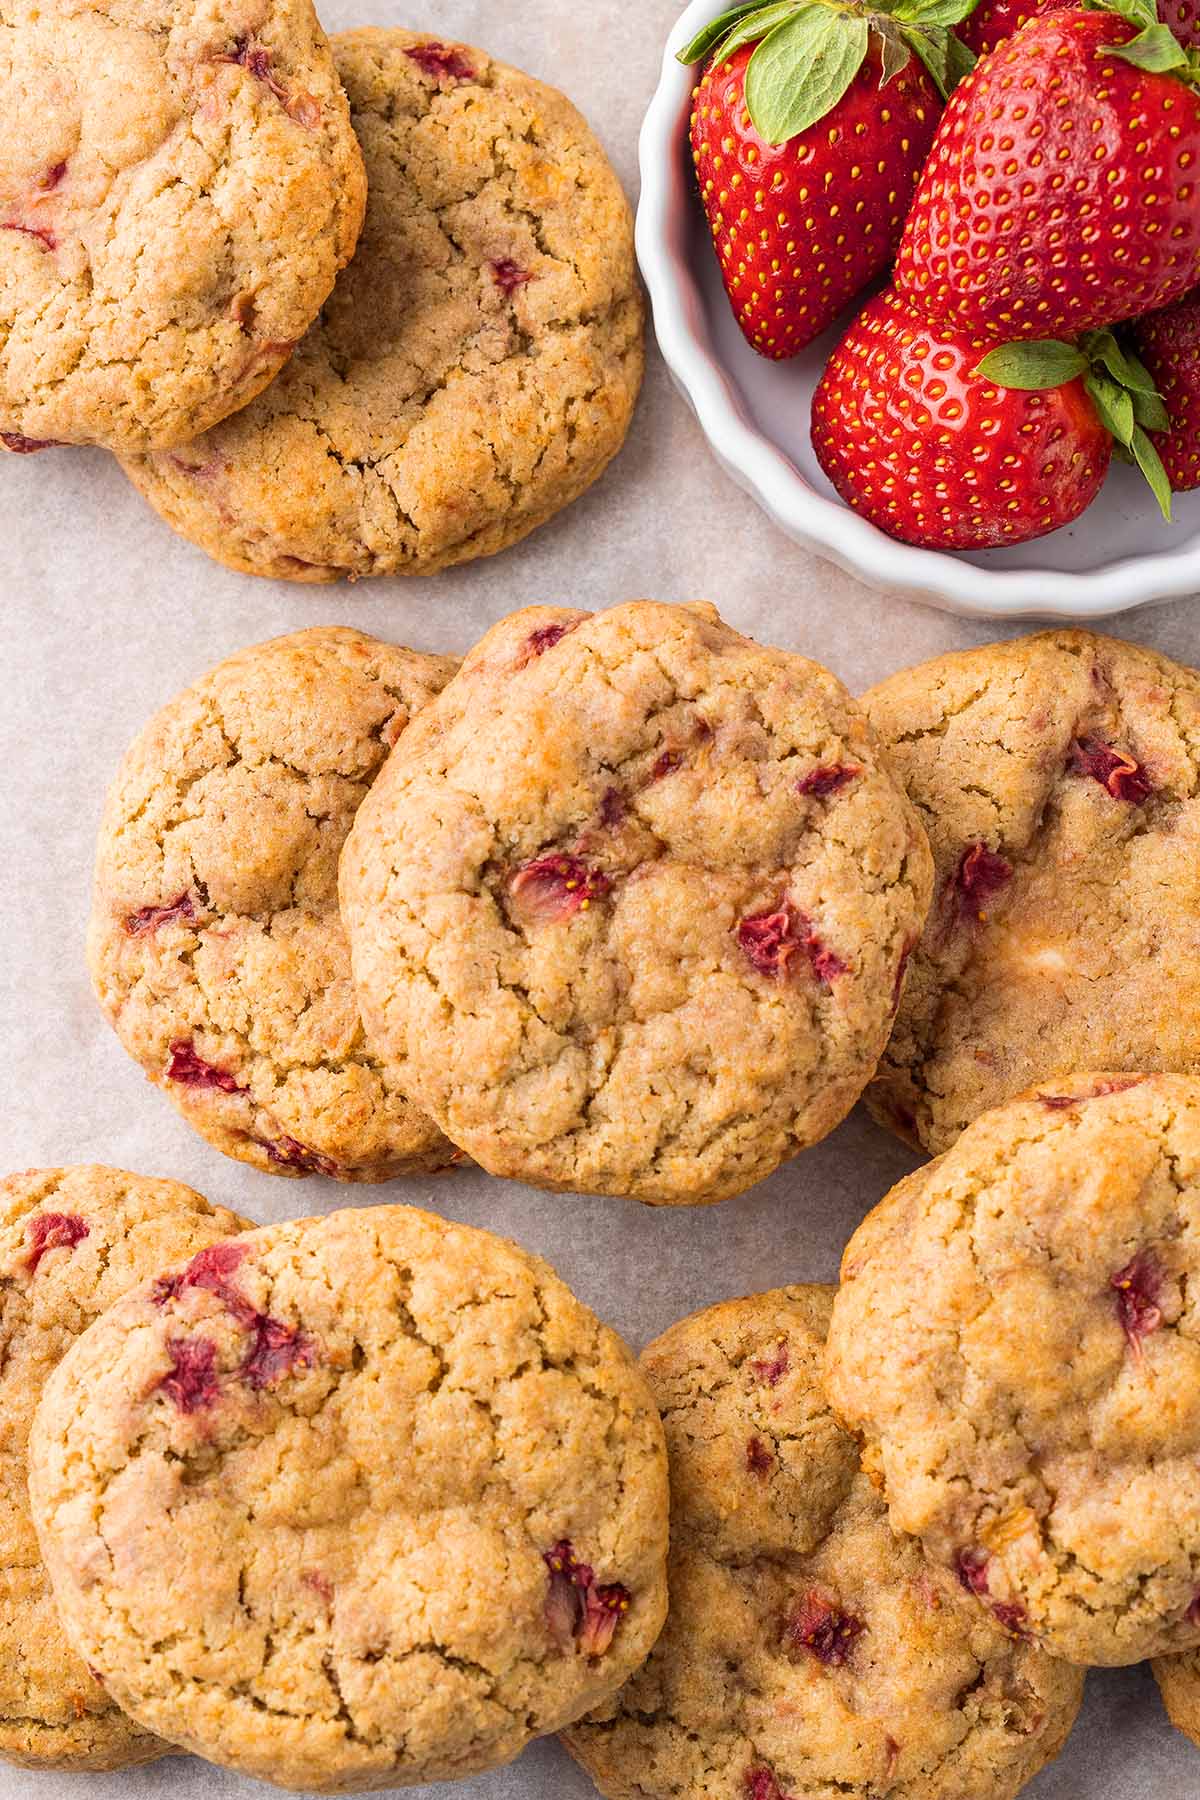 Strawberry cheesecake cookies and a bowl with fresh strawberries